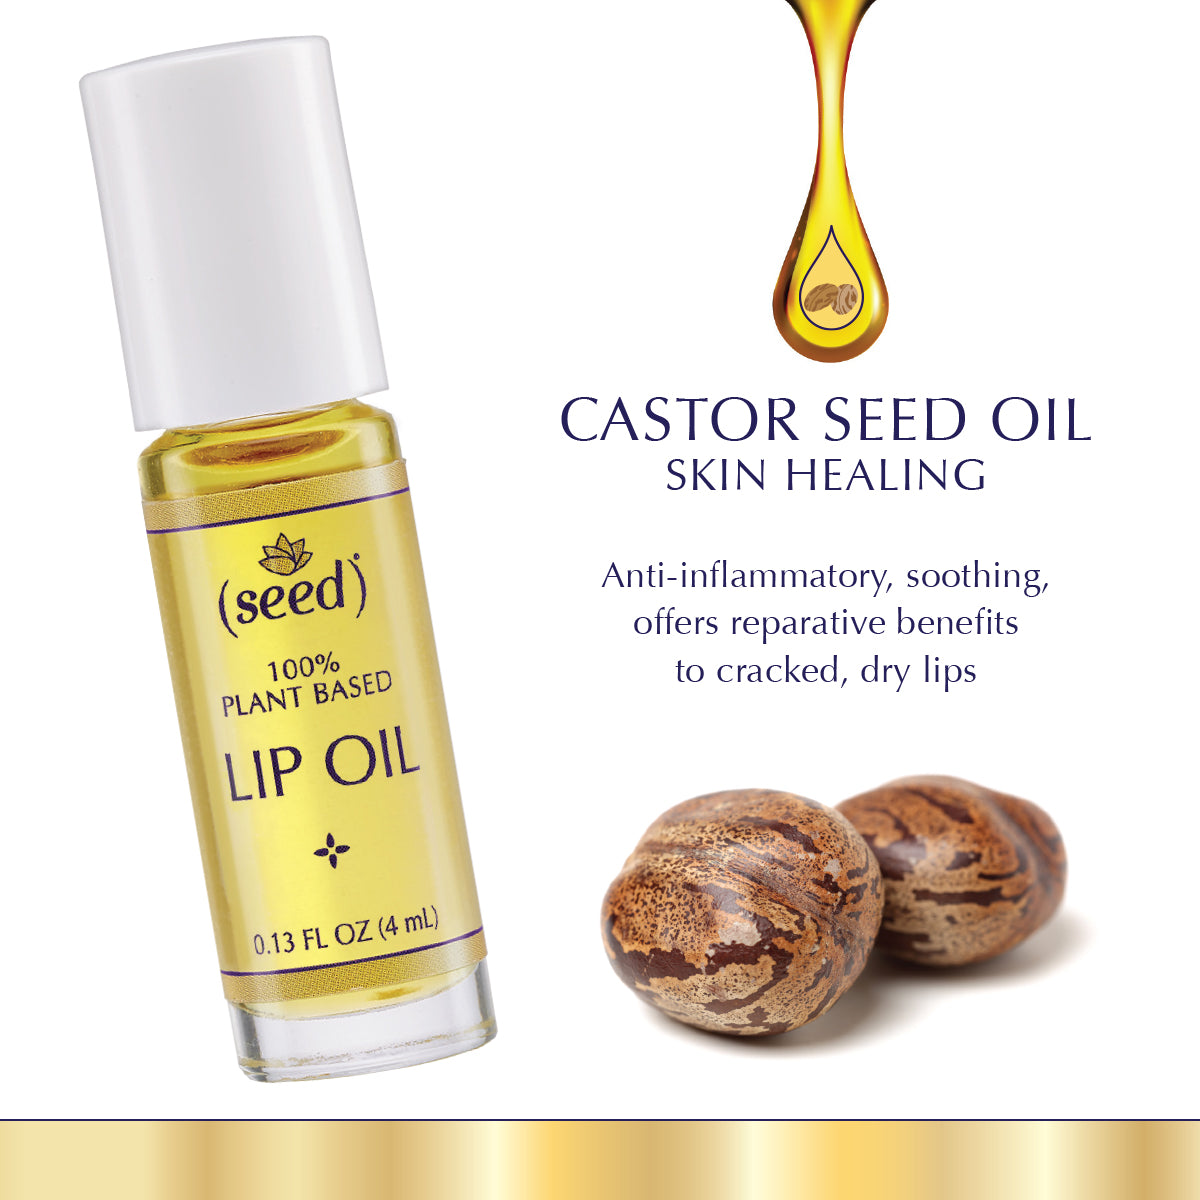 Seed Lip Oil is enriched with castor seed oil